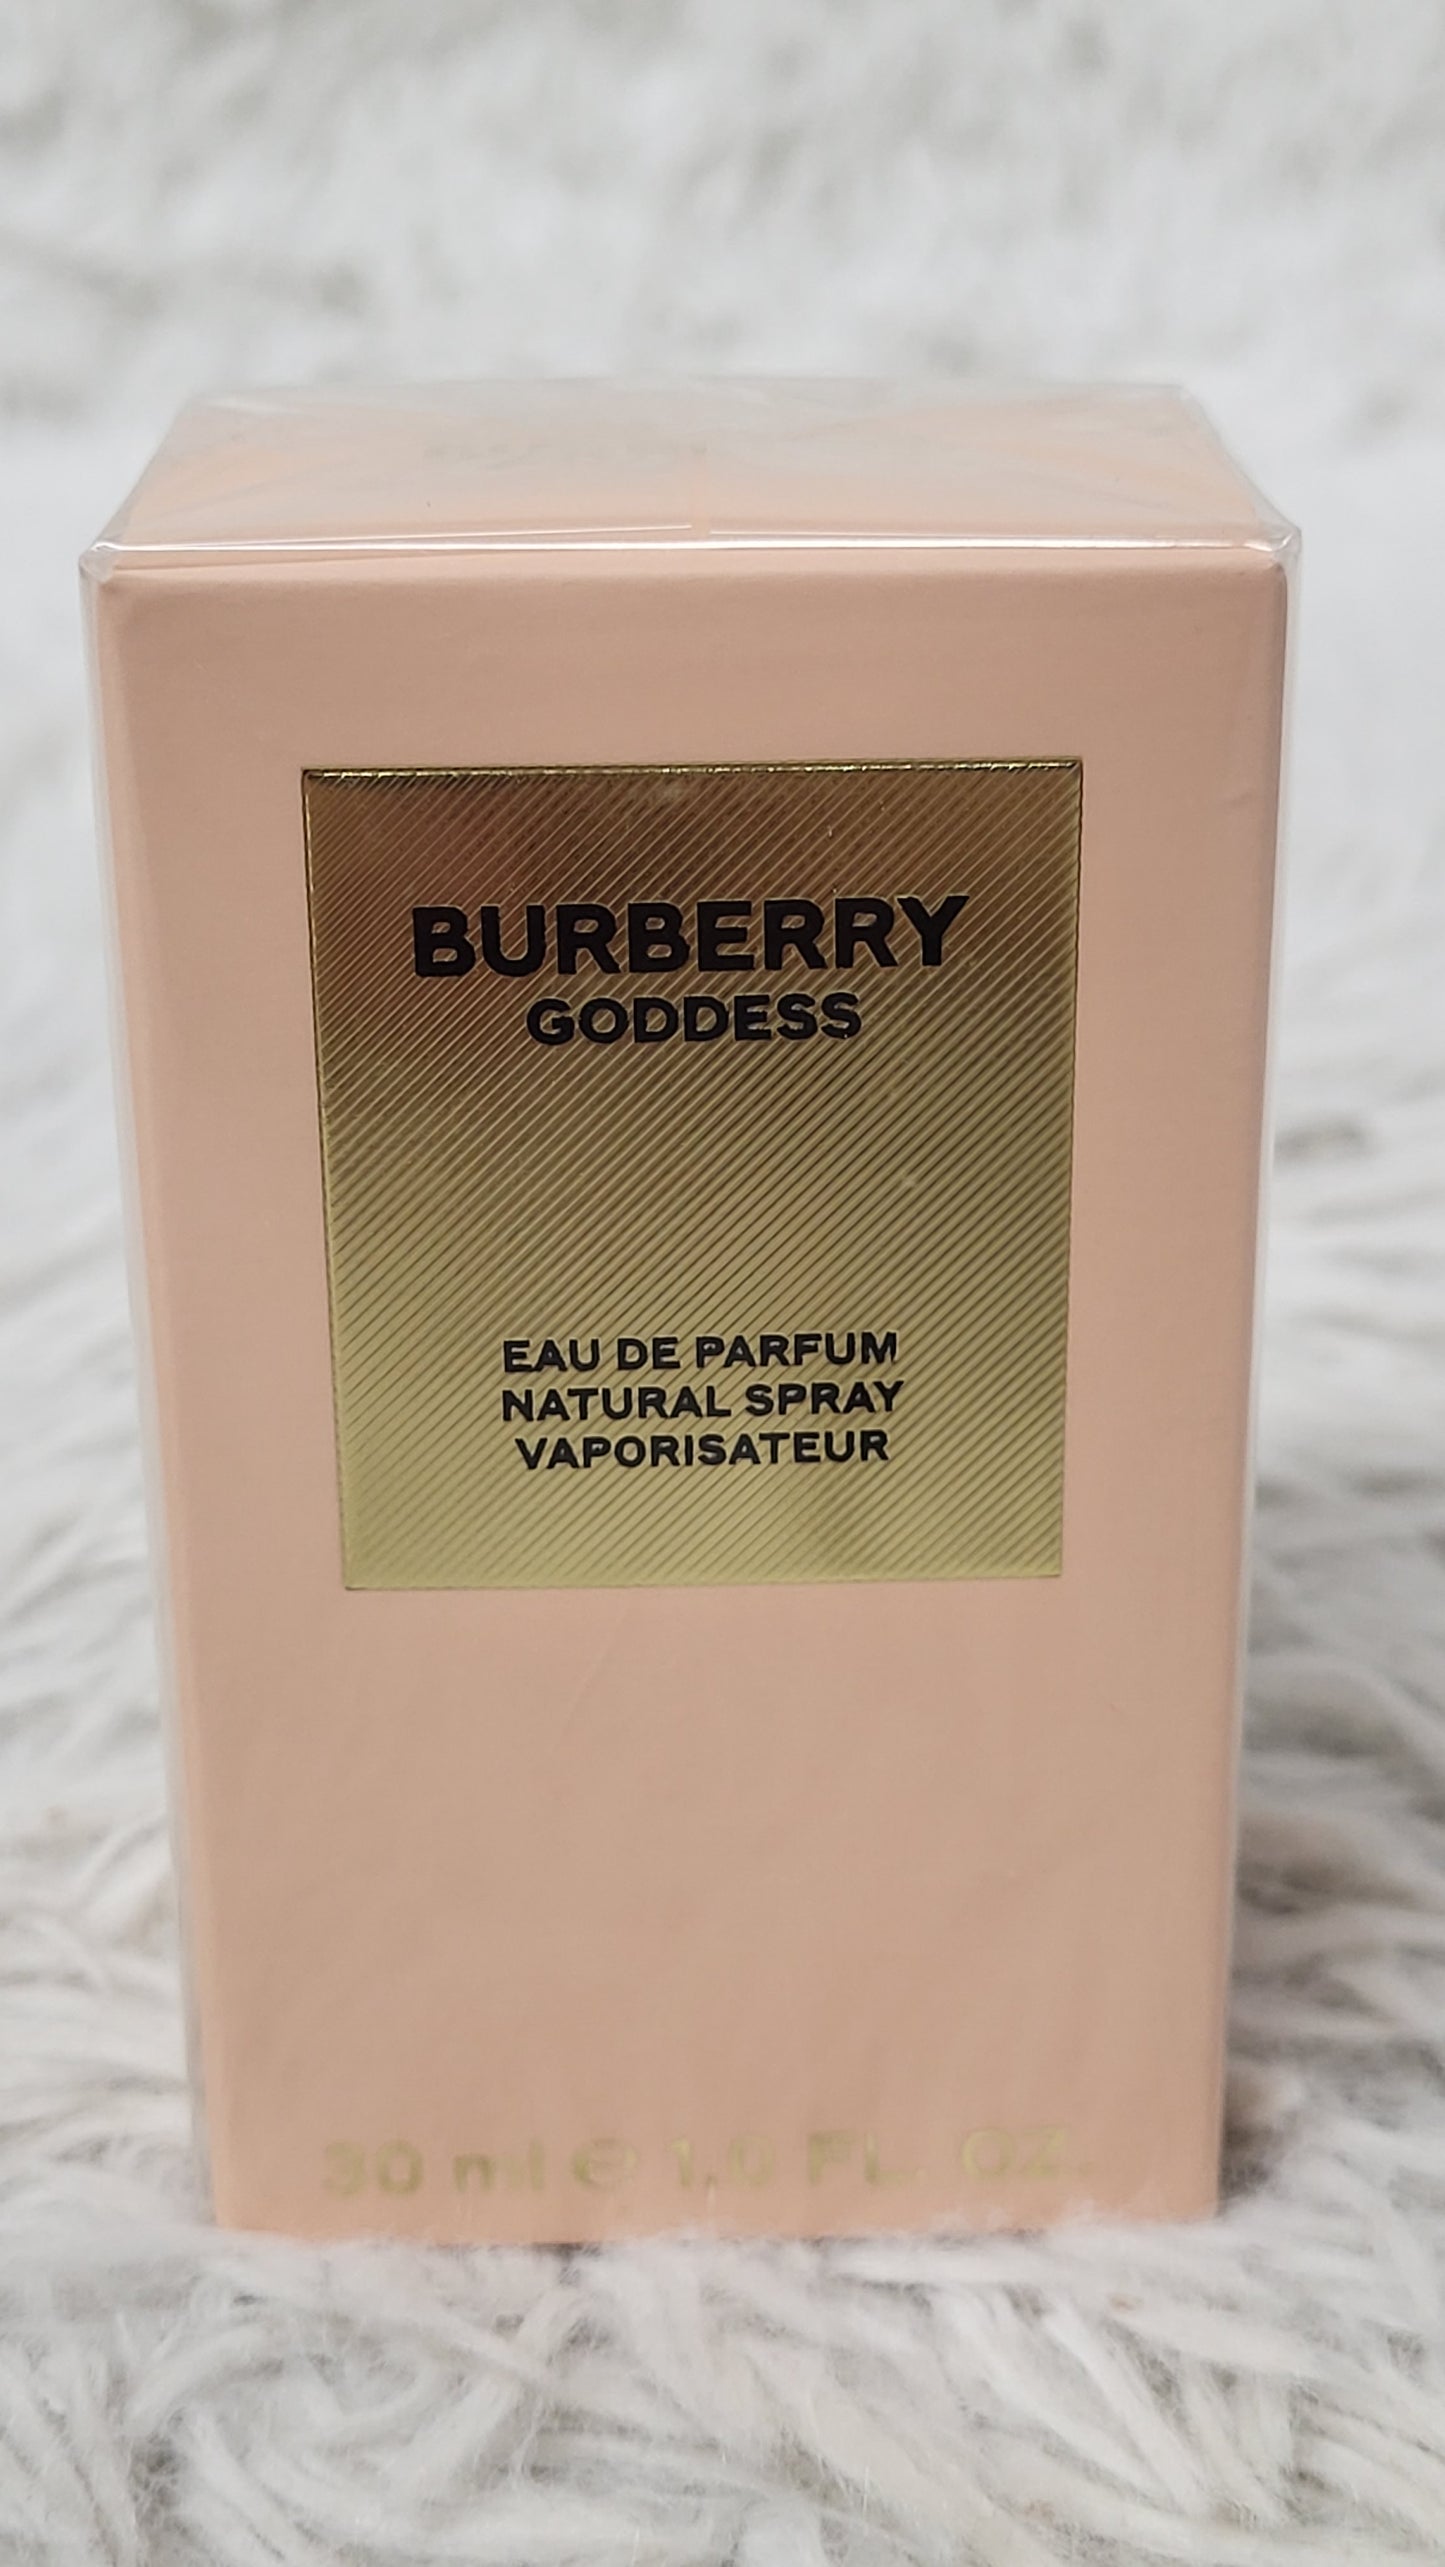 Burberry Goddess 30ml / 1 oz EDP New Sealed Authentic Ships Fast Finescents